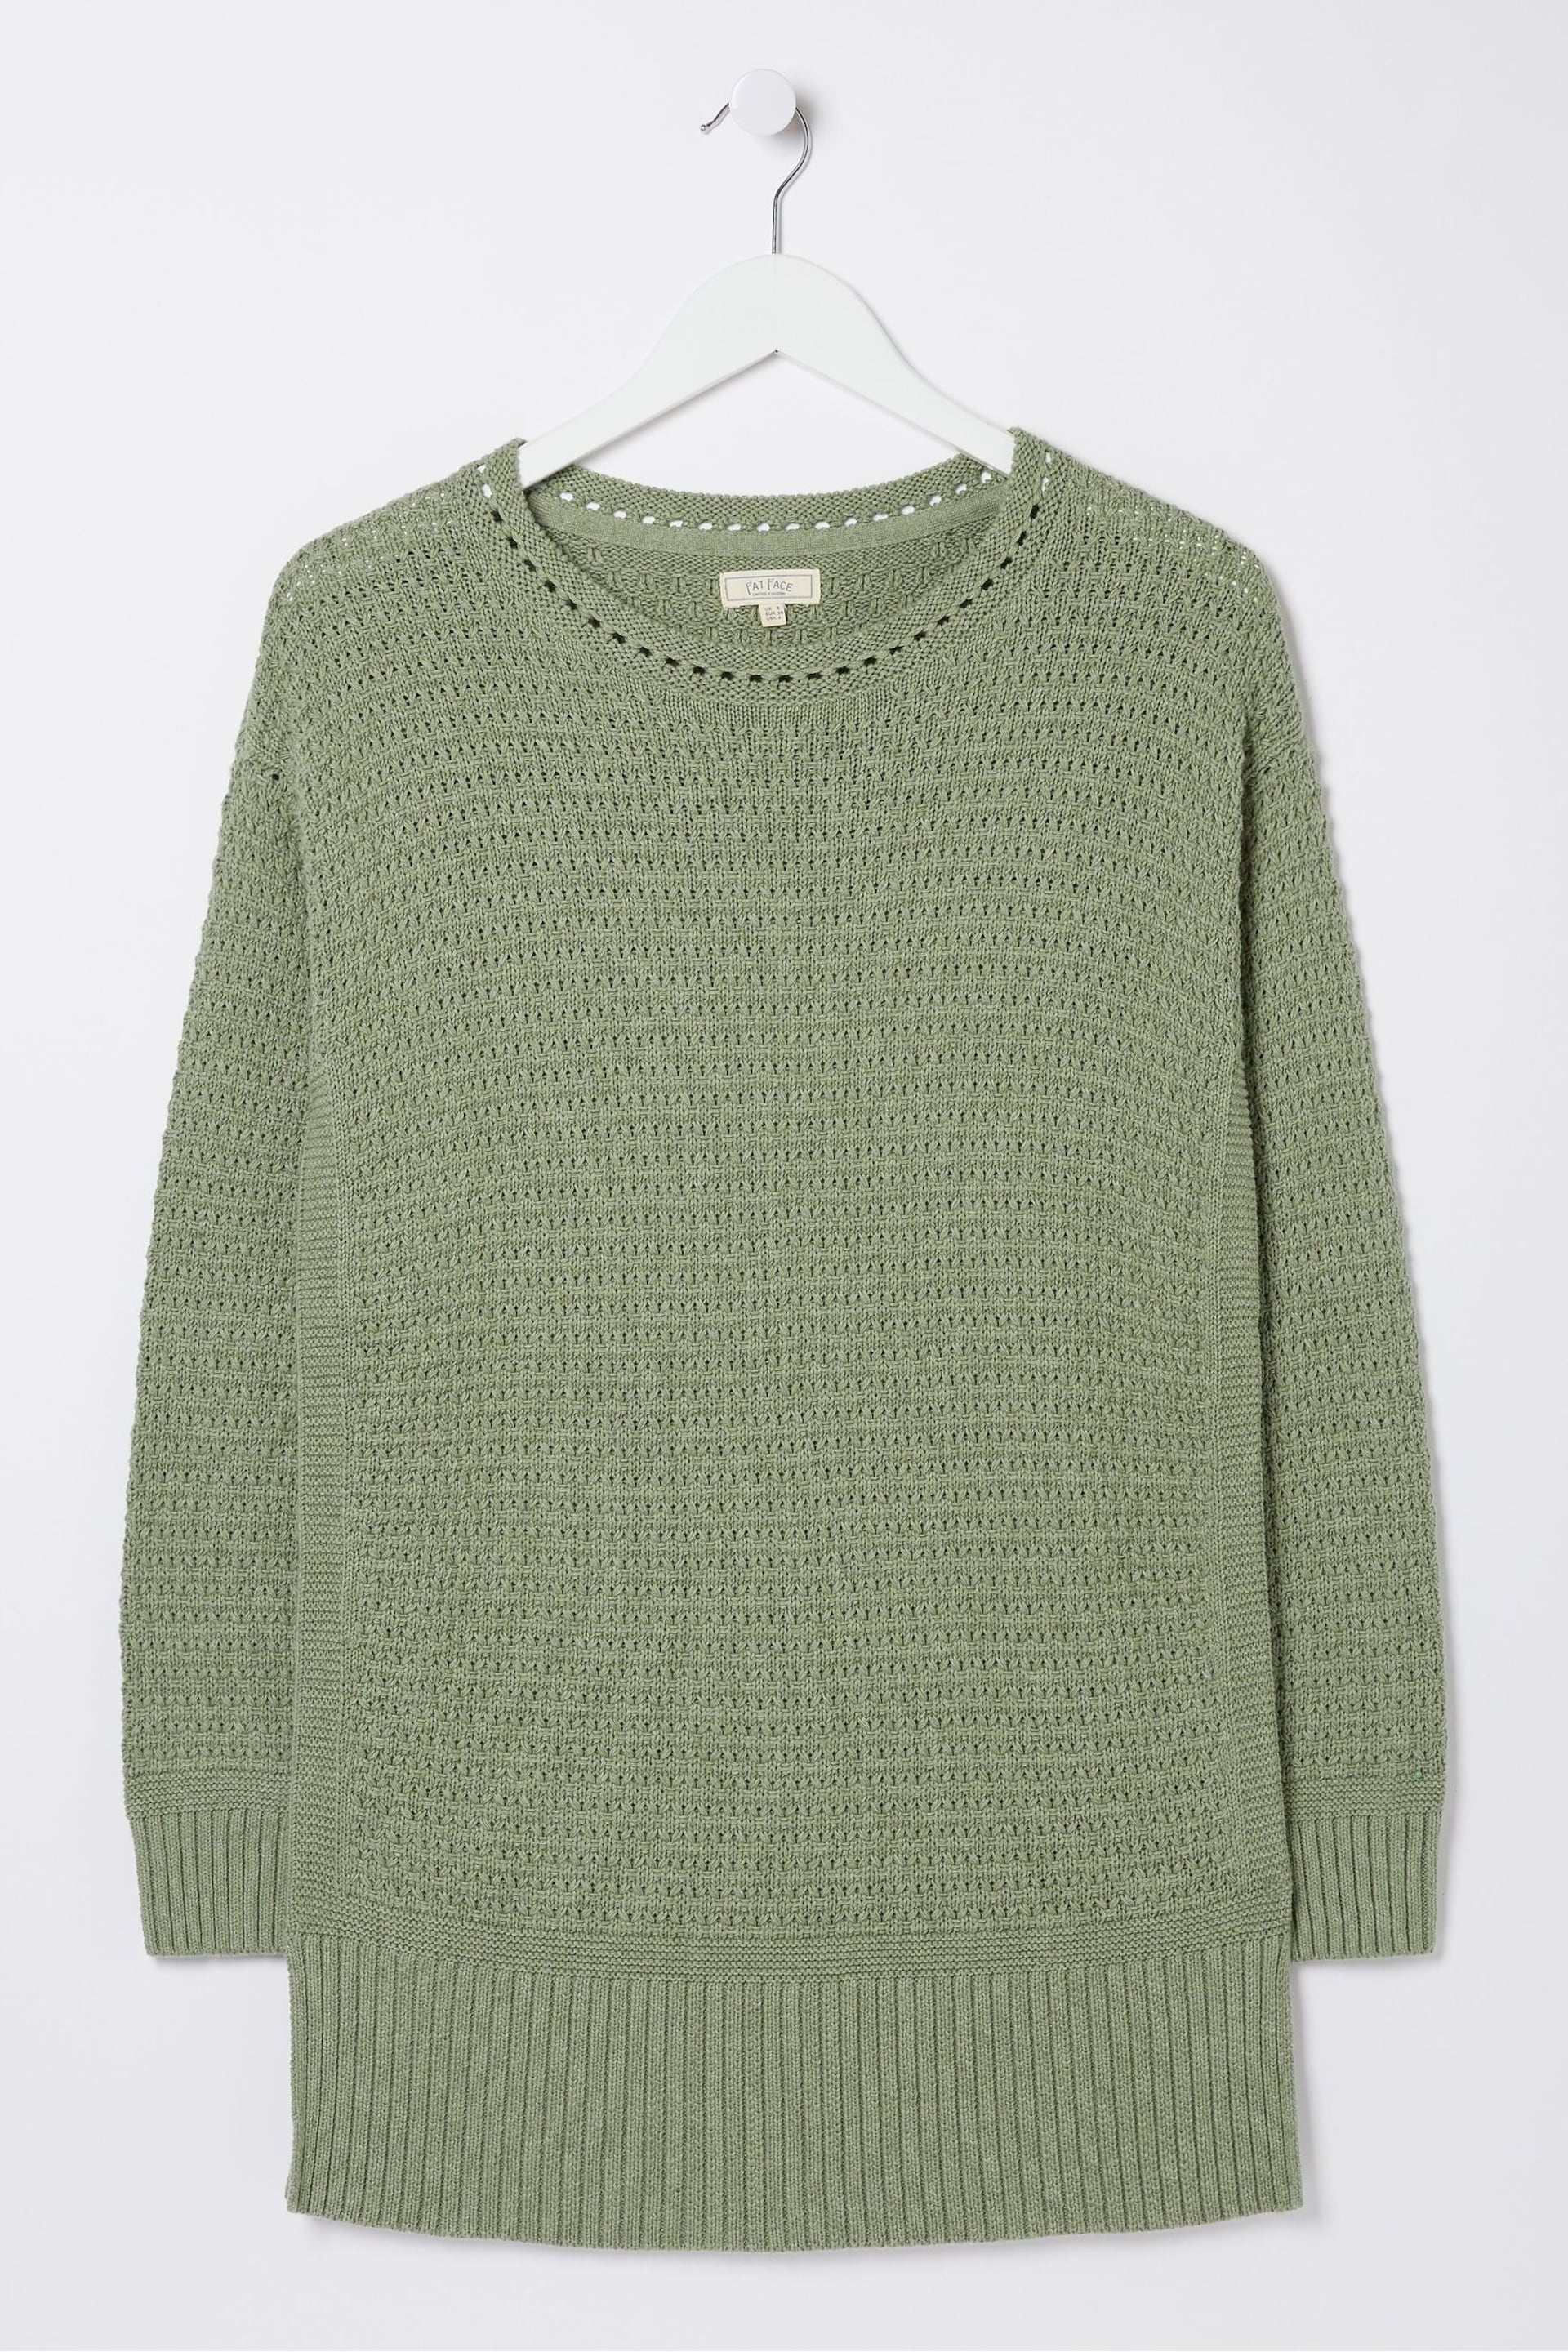 FatFace Green Tunic Jumper - Image 4 of 4